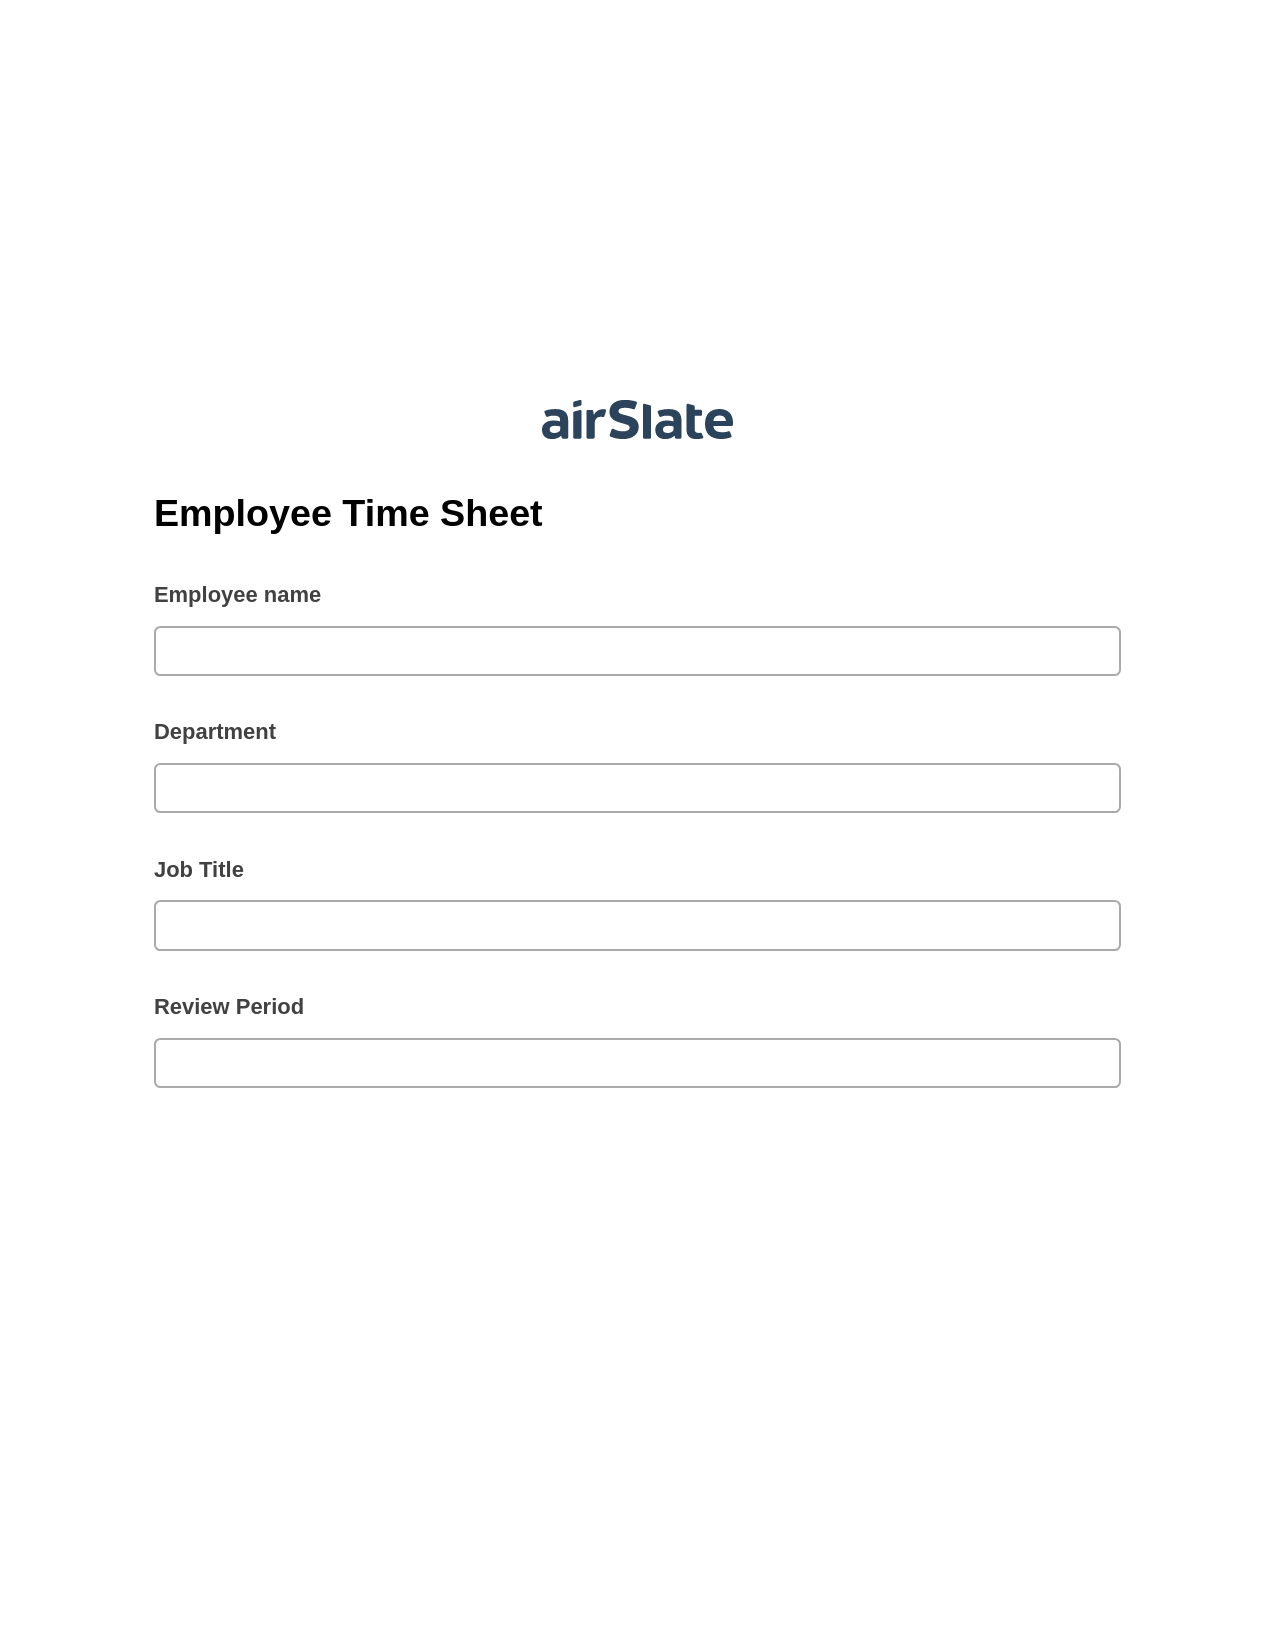 Employee Time Sheet Pre-fill from Google Sheets Bot, Create slate addon, Export to Excel 365 Bot